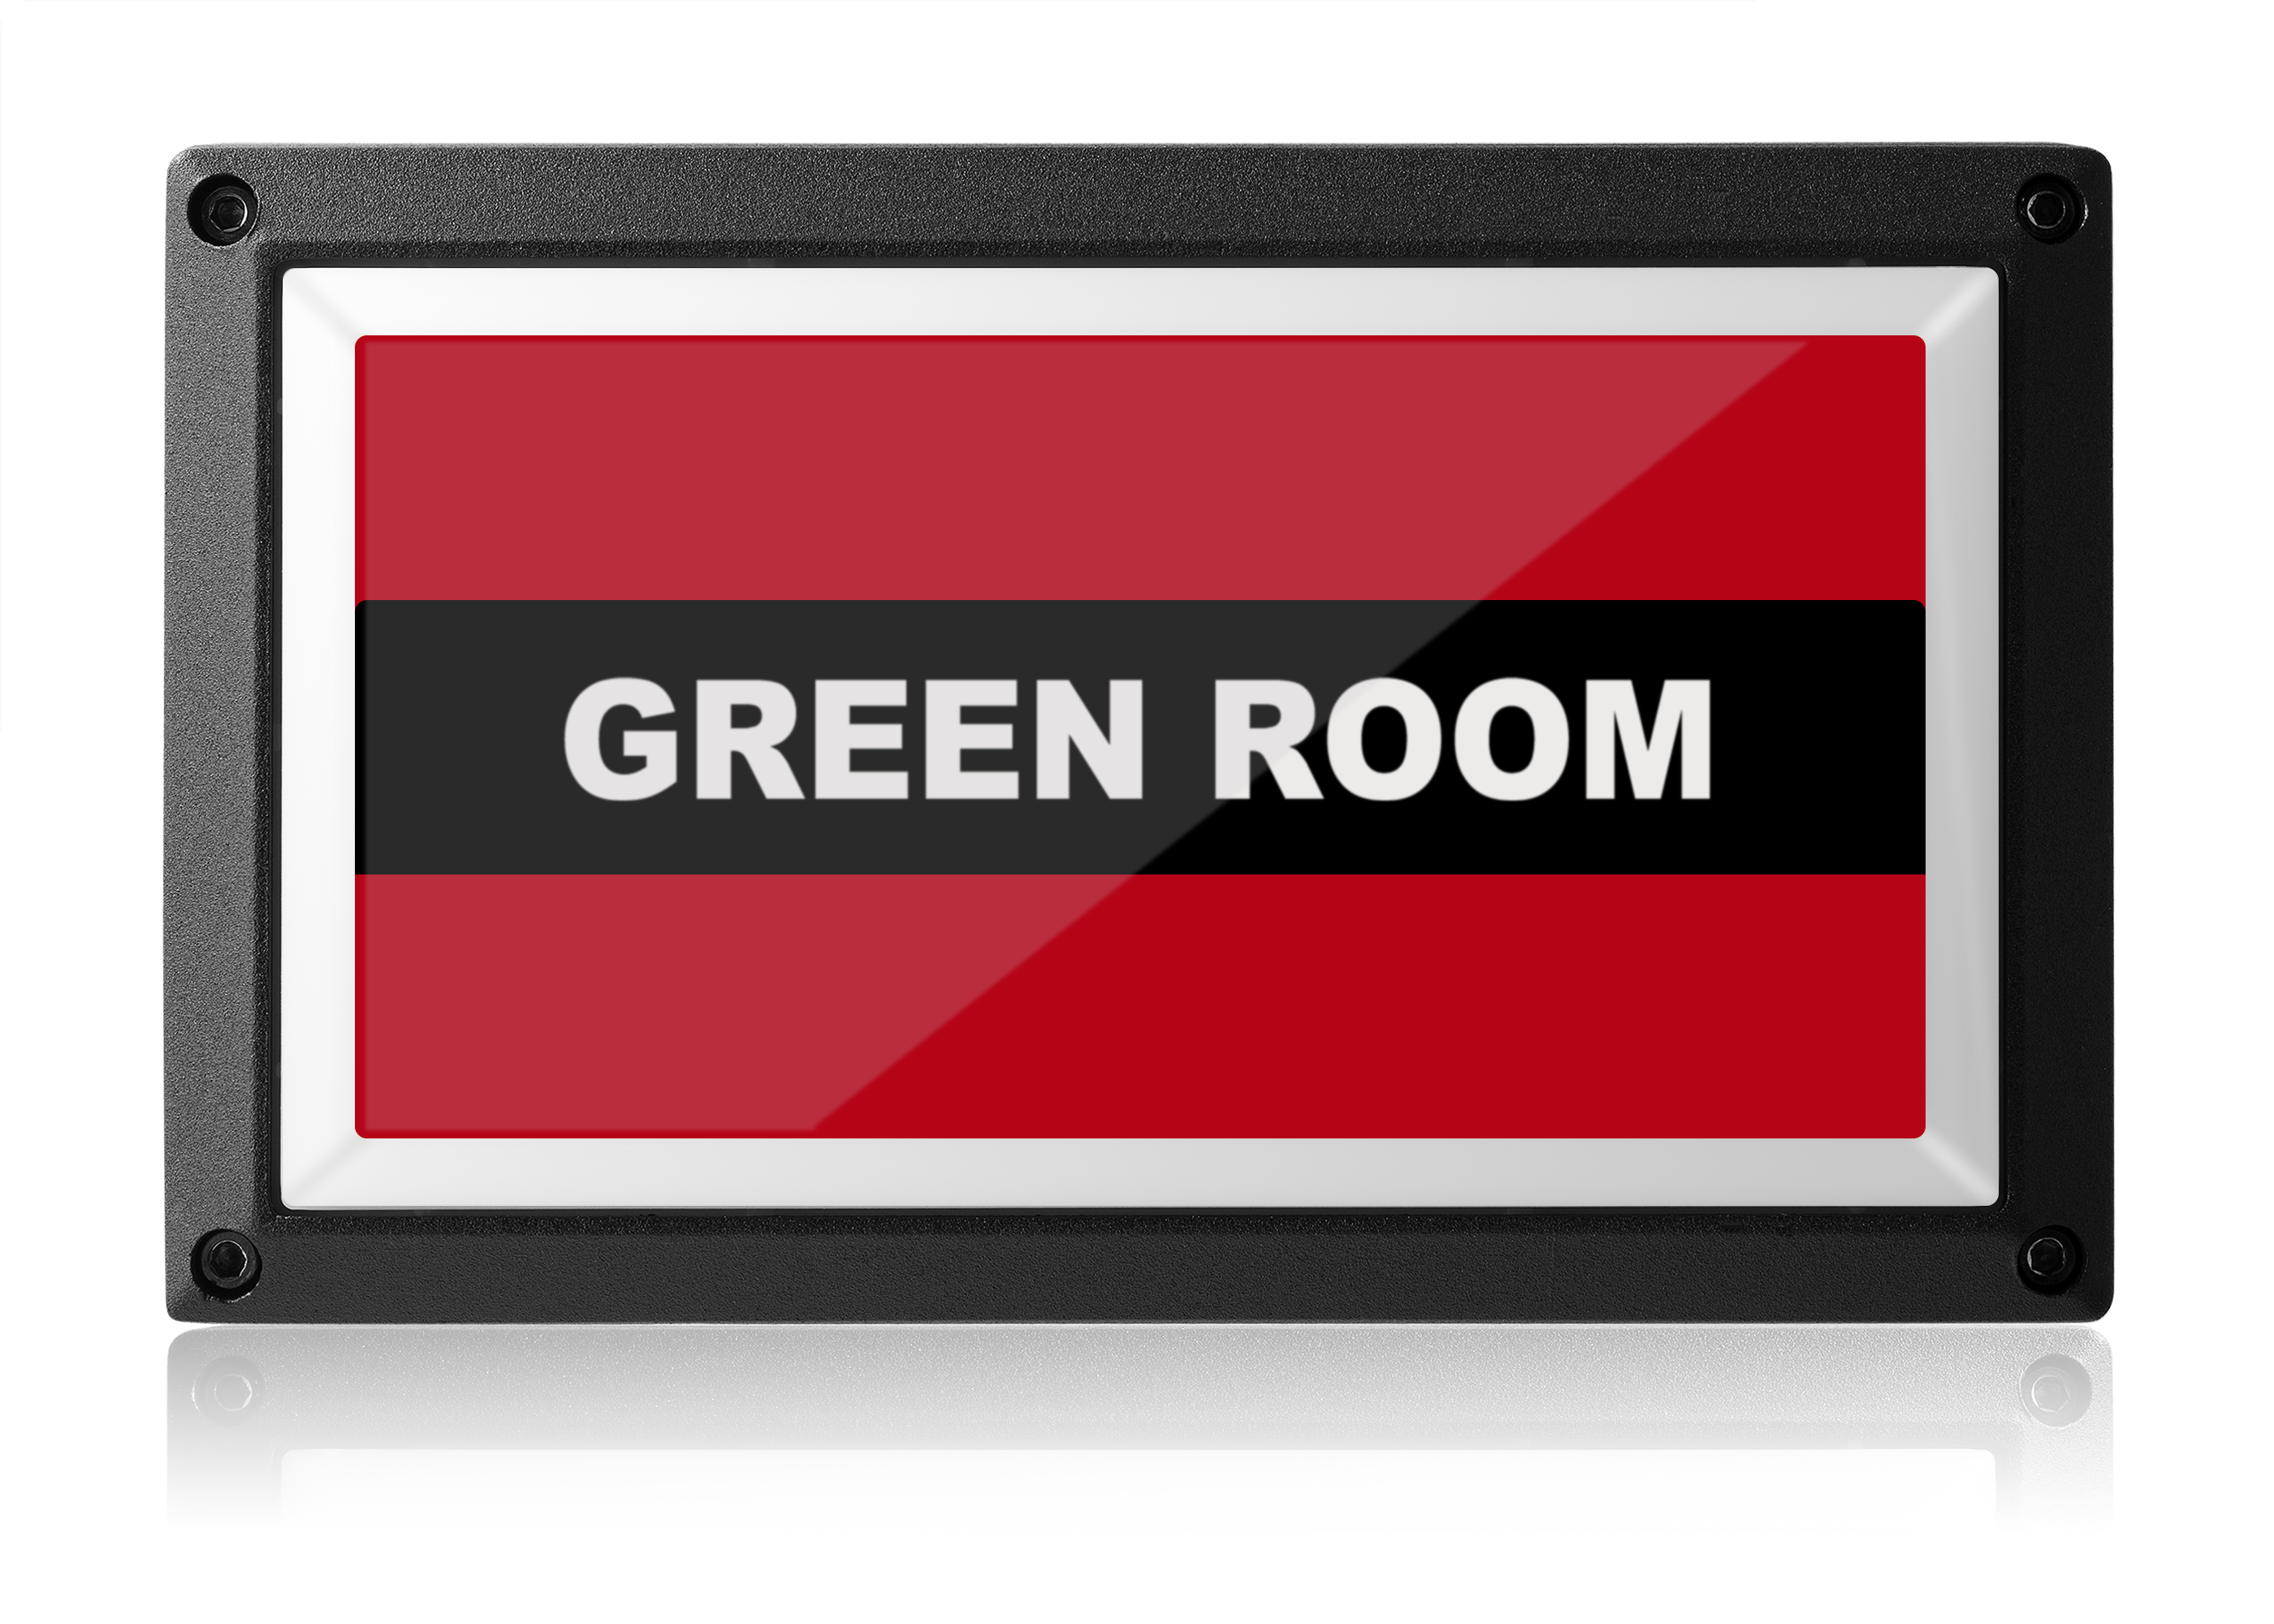 Green Room Light - Red ISO - Rekall Dynamics LED Sign-Red-Low Voltage (12-24v DC)-